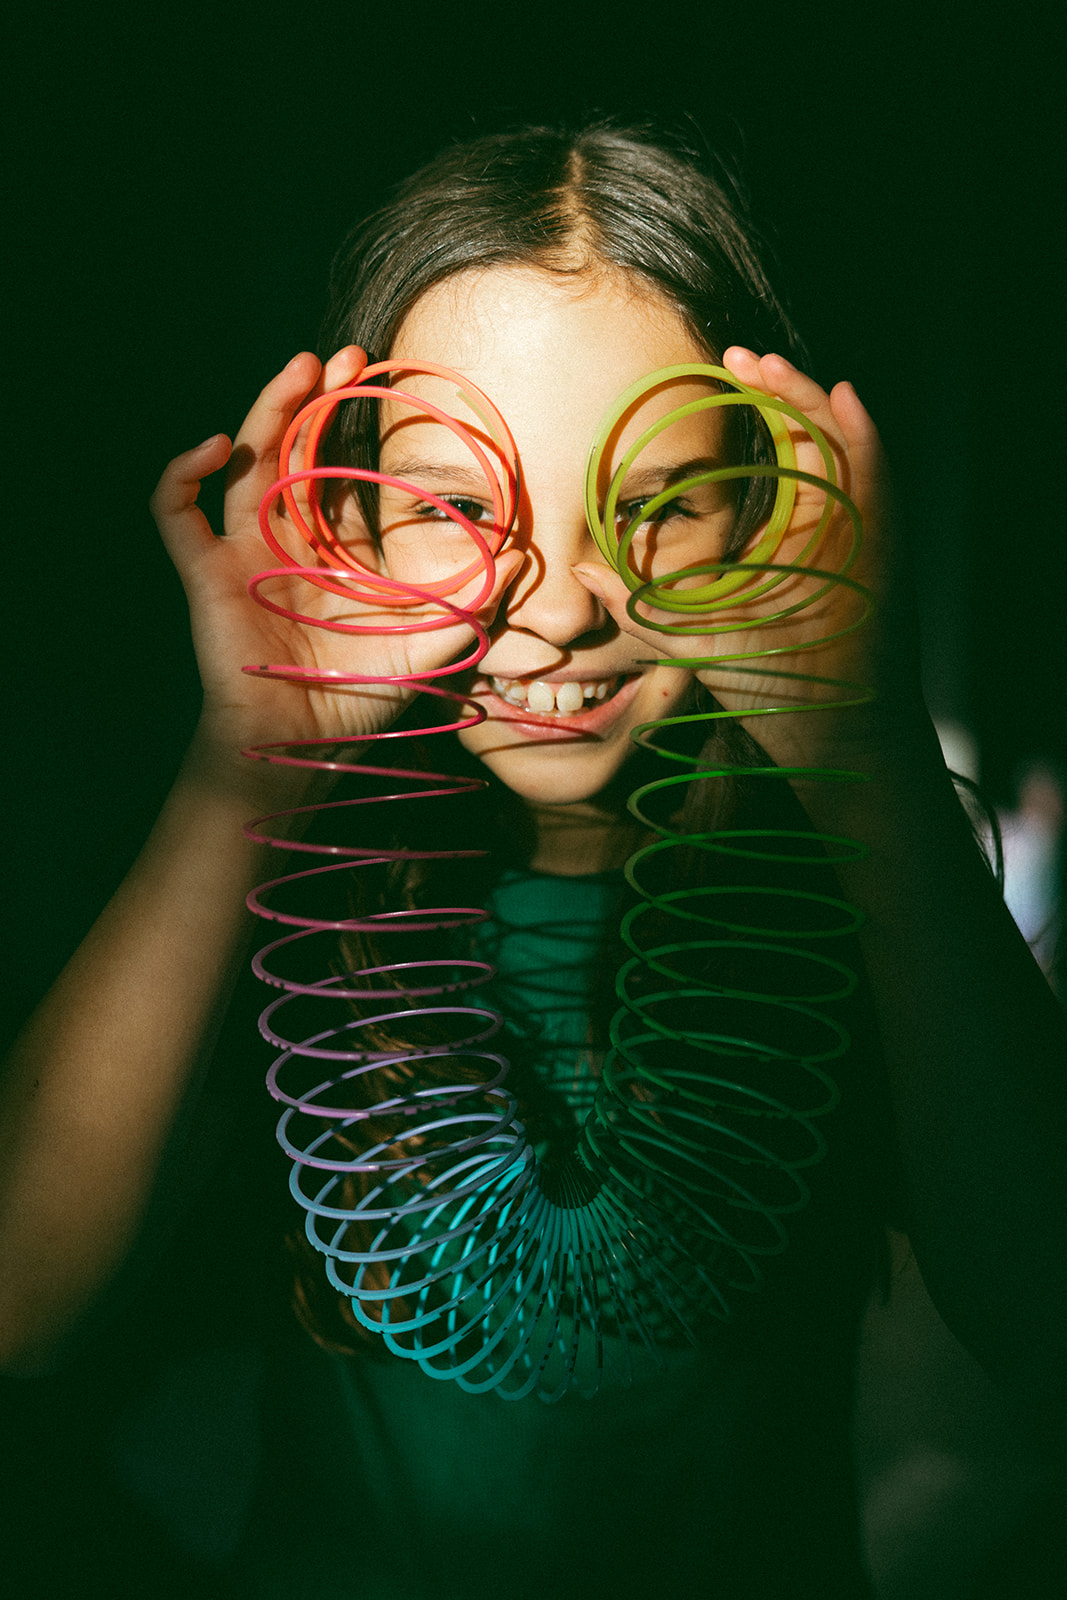 young girl holding slinky ends in front of her eyes like glasses